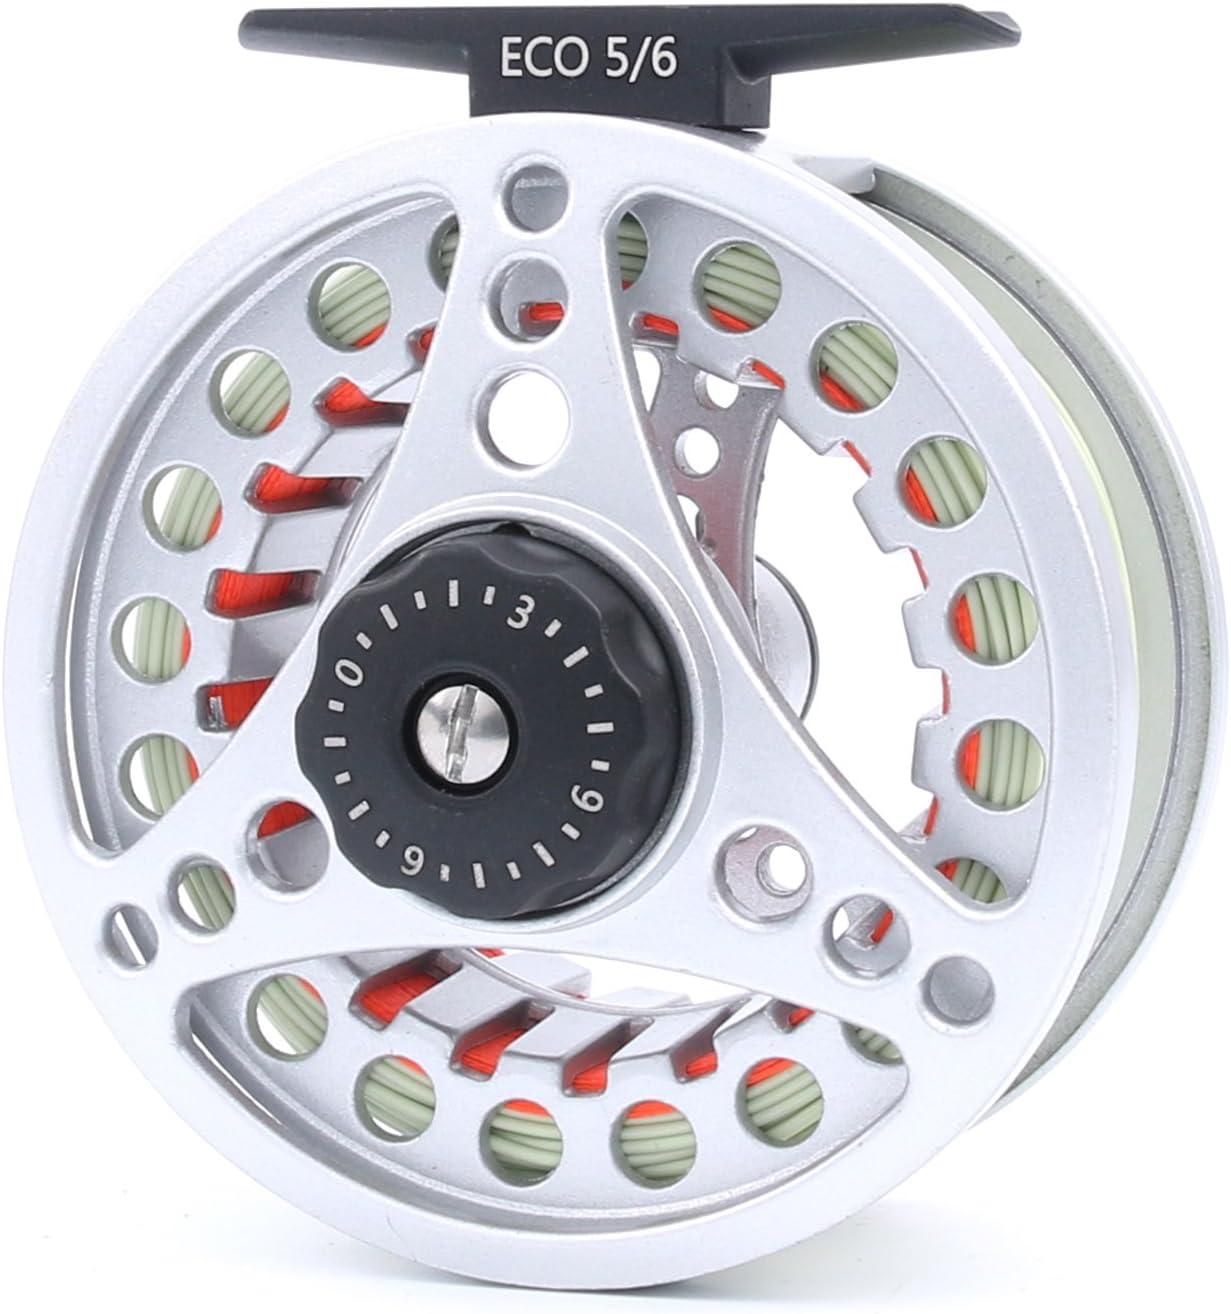 M MAXIMUMCATCH Maxcatch ECO Large Arbor Fly Fishing Reel (3/4wt 5/6wt 7/8wt)  and Pre-Loaded Fly Reel with Line Combo Silver Reel Loaded Moss Green Line  3/4 weight